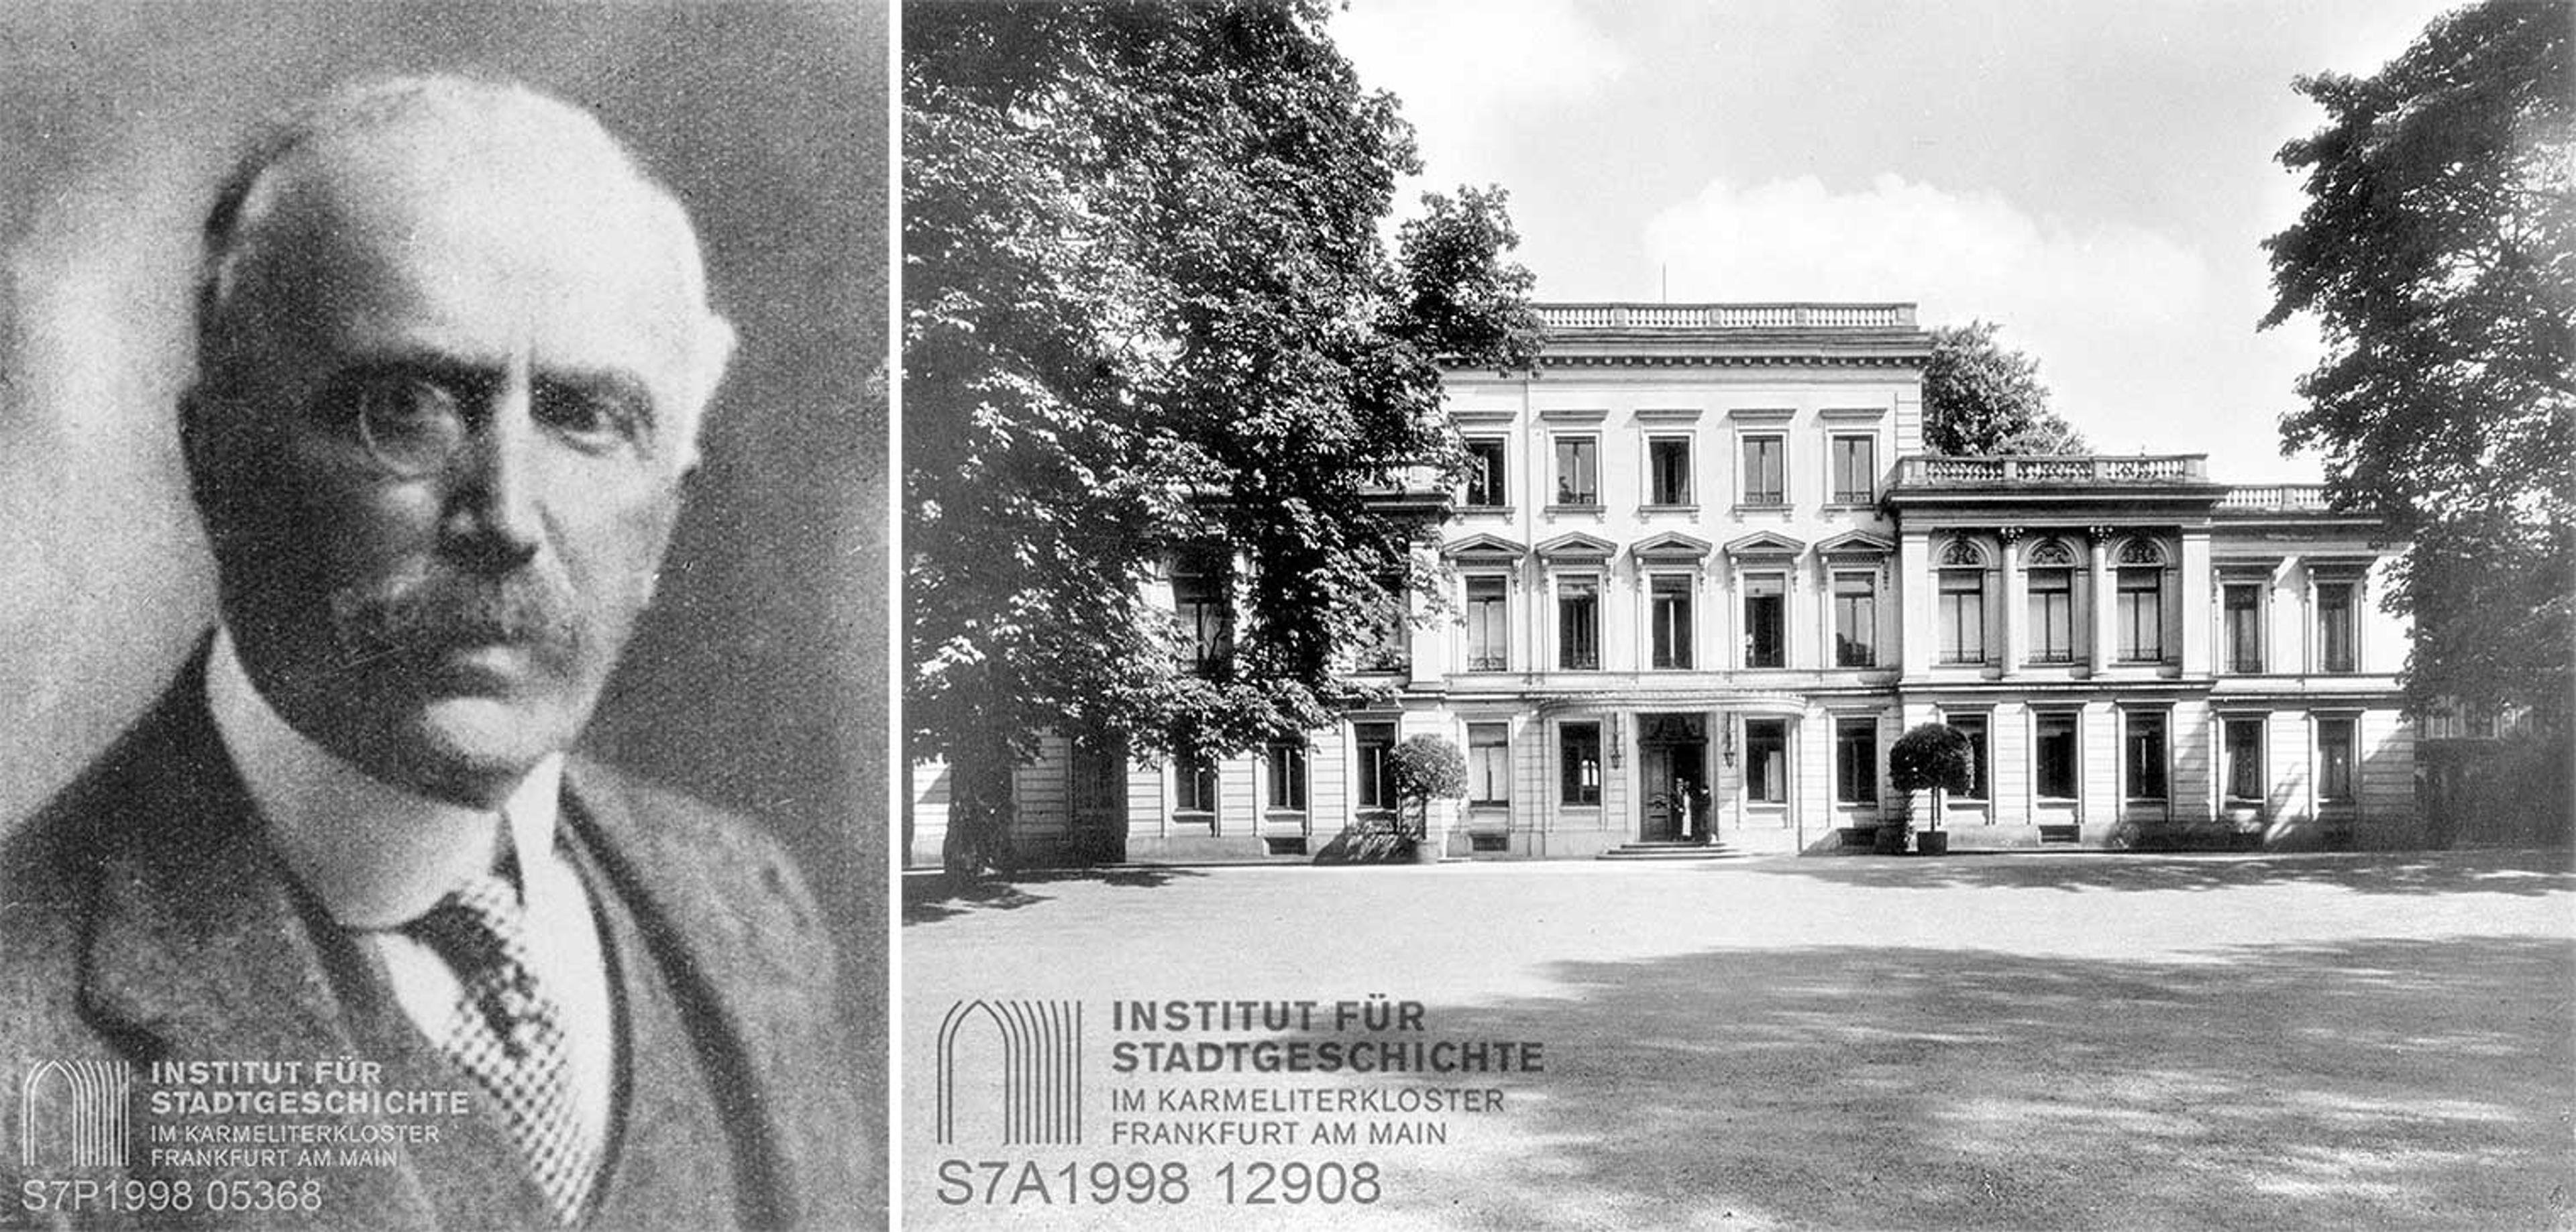 A black-and-white photo of Maximilian von Goldschmidt-Rothschild and a black-and-white photo of the Rothschild palace